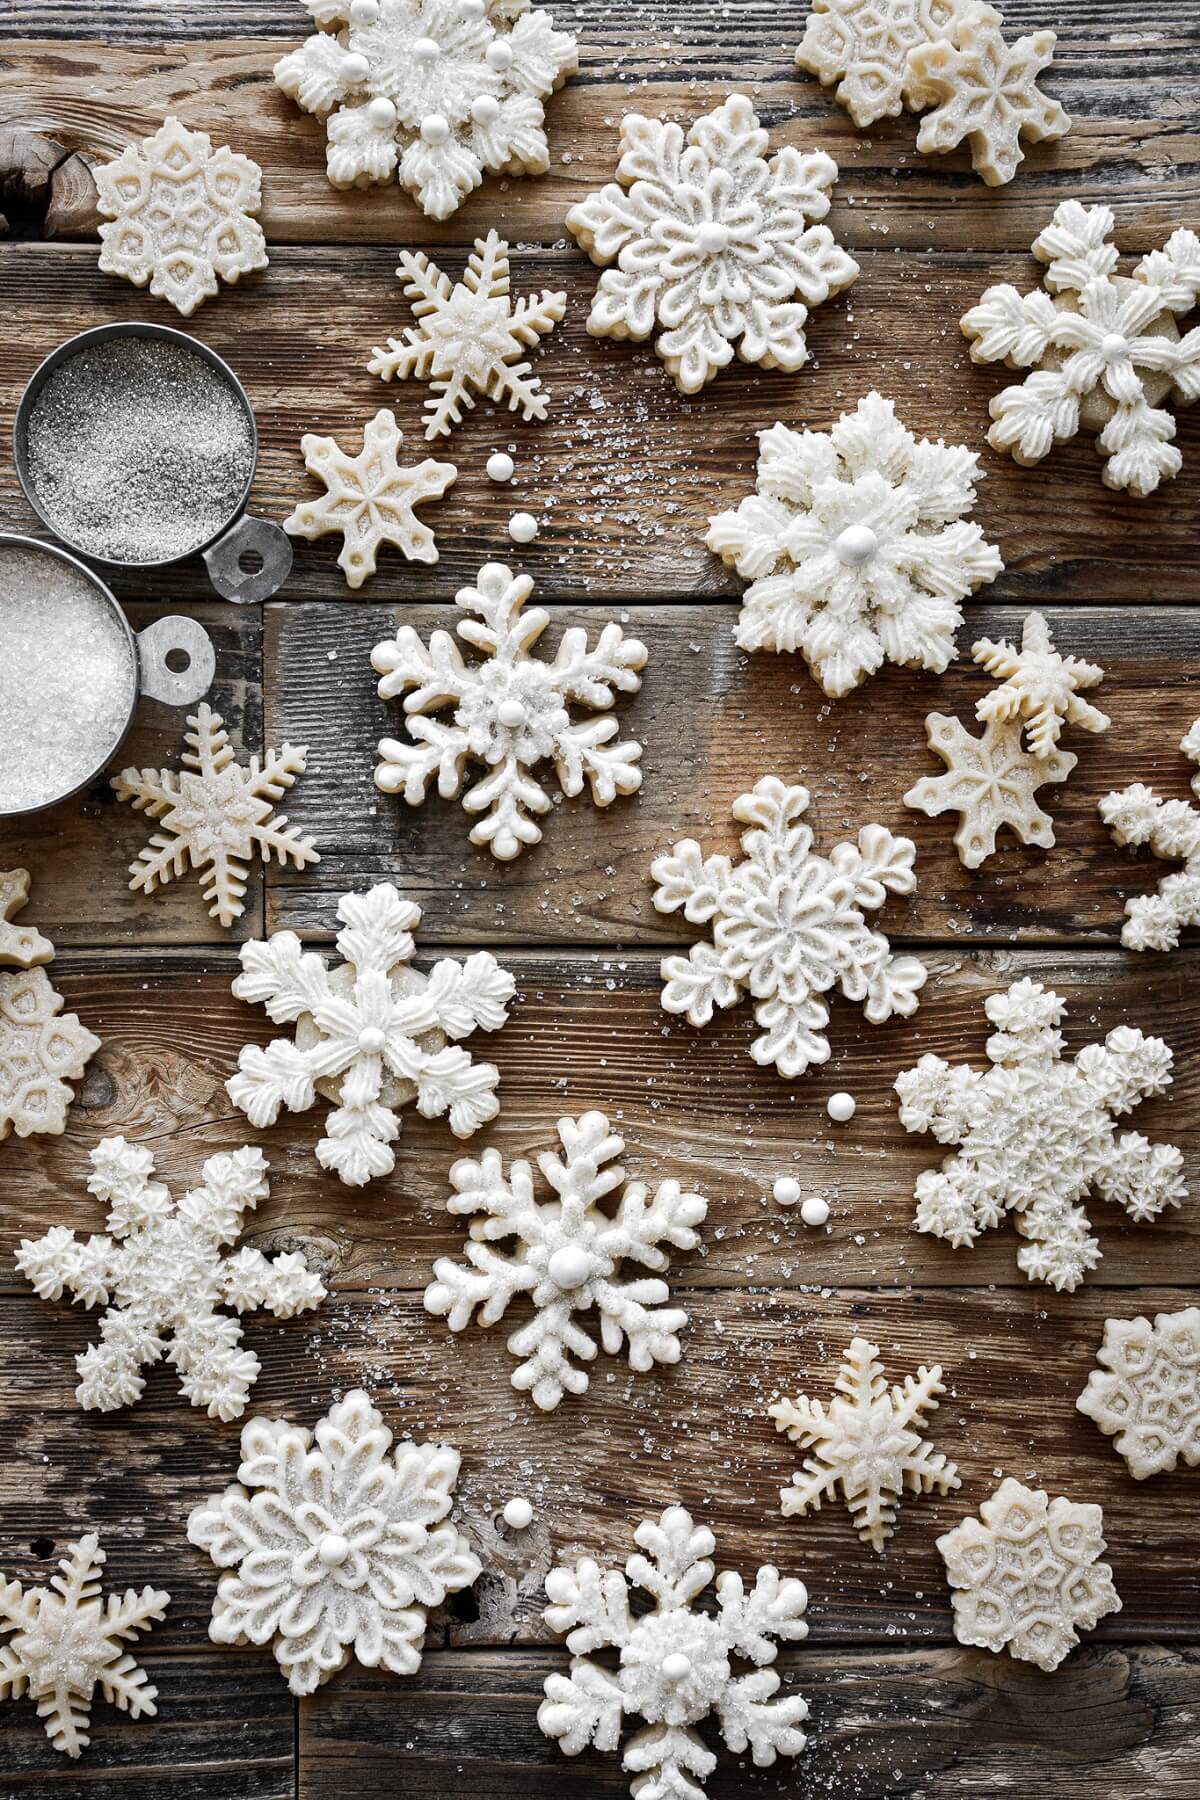 Decorated snowflake sugar cookies with buttercream frosting.